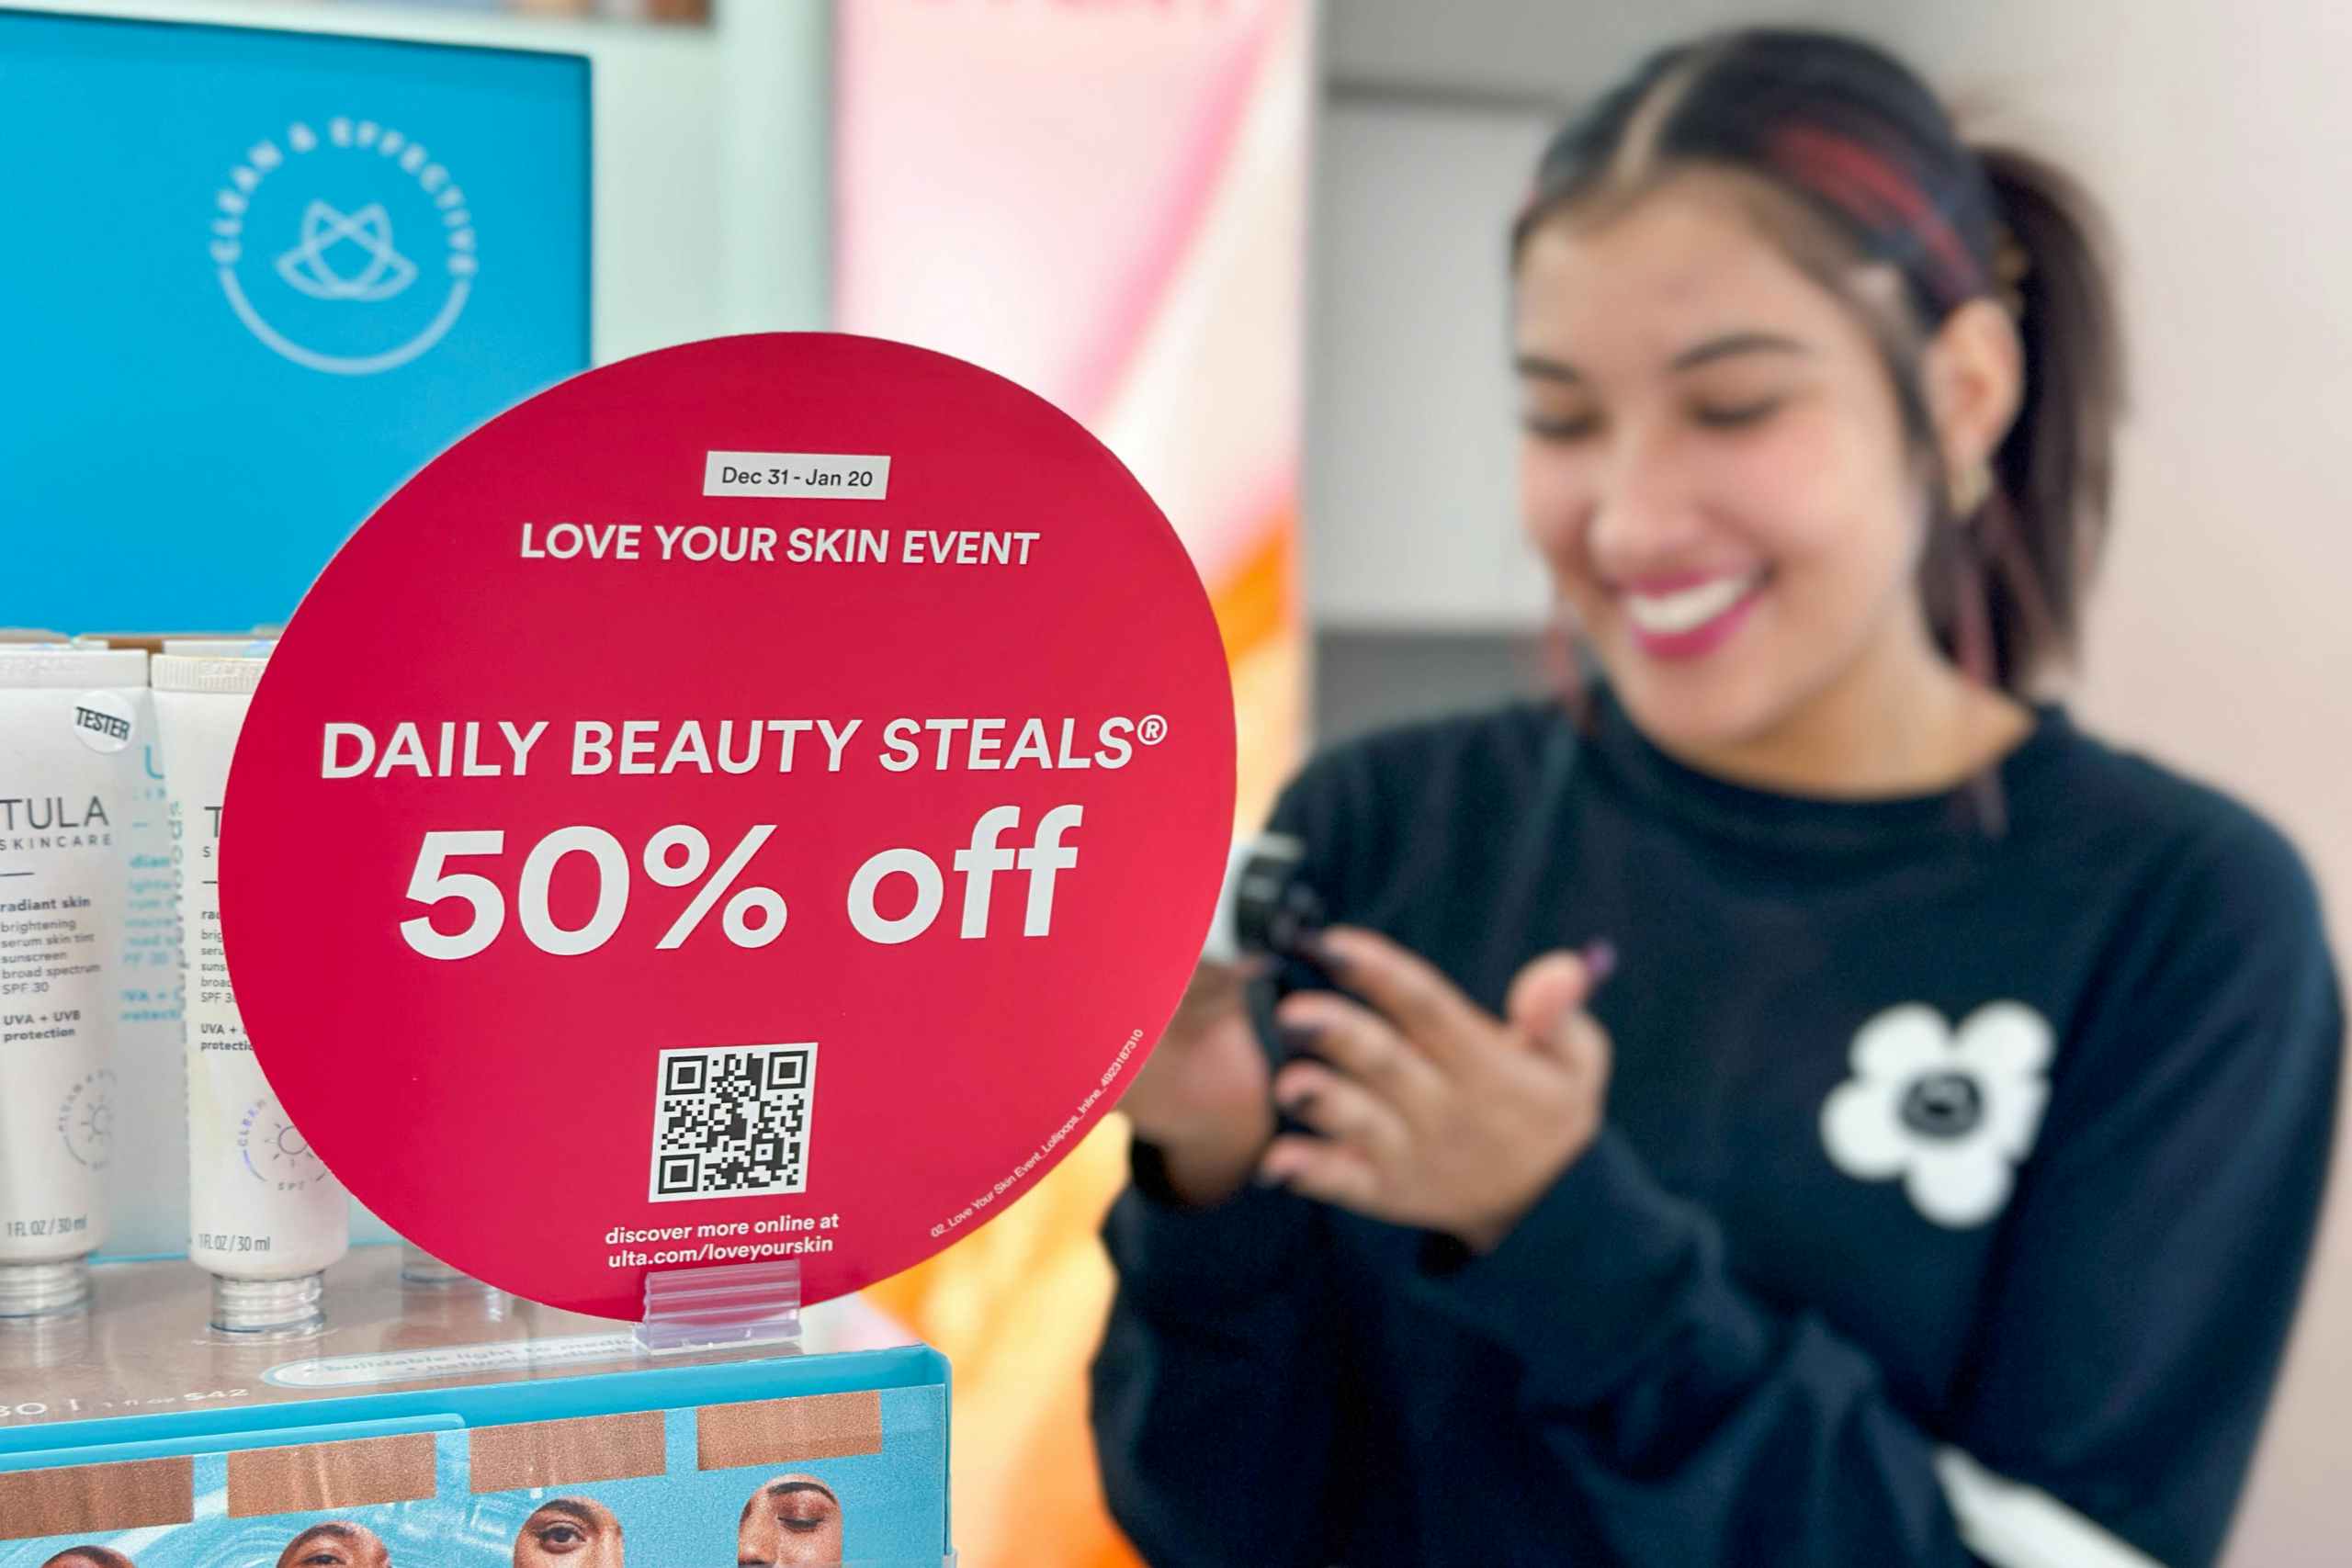 ulta-beauty-daily-steals-50-off-sale-love-your-skin-event-model-kcl-4